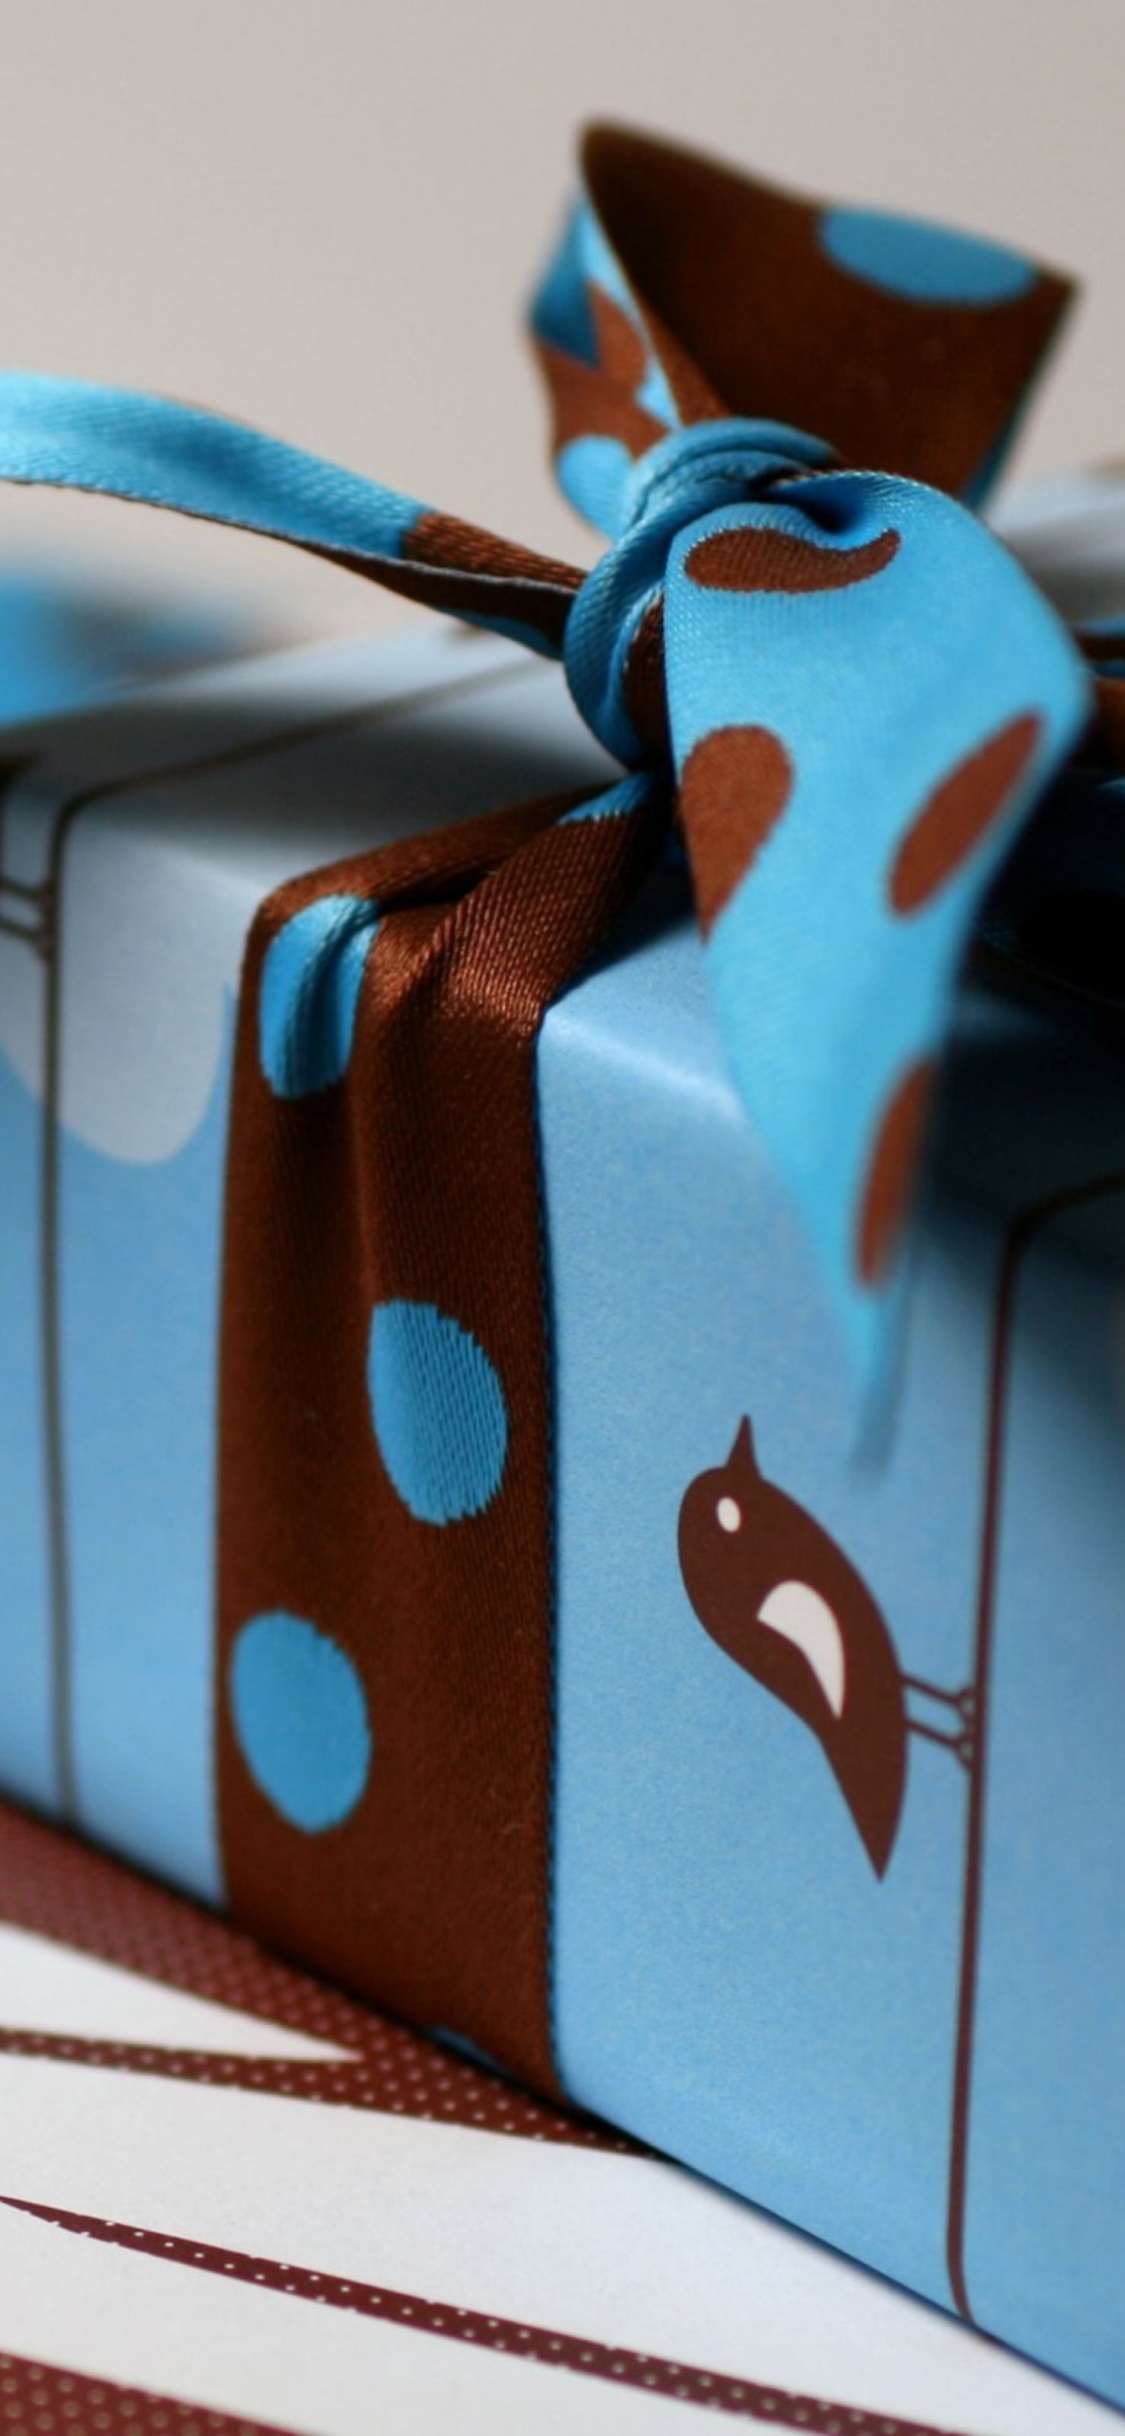 Gift, Box, Ribbon, Blue, Turquoise. Wallpaper in 1125x2436 Resolution